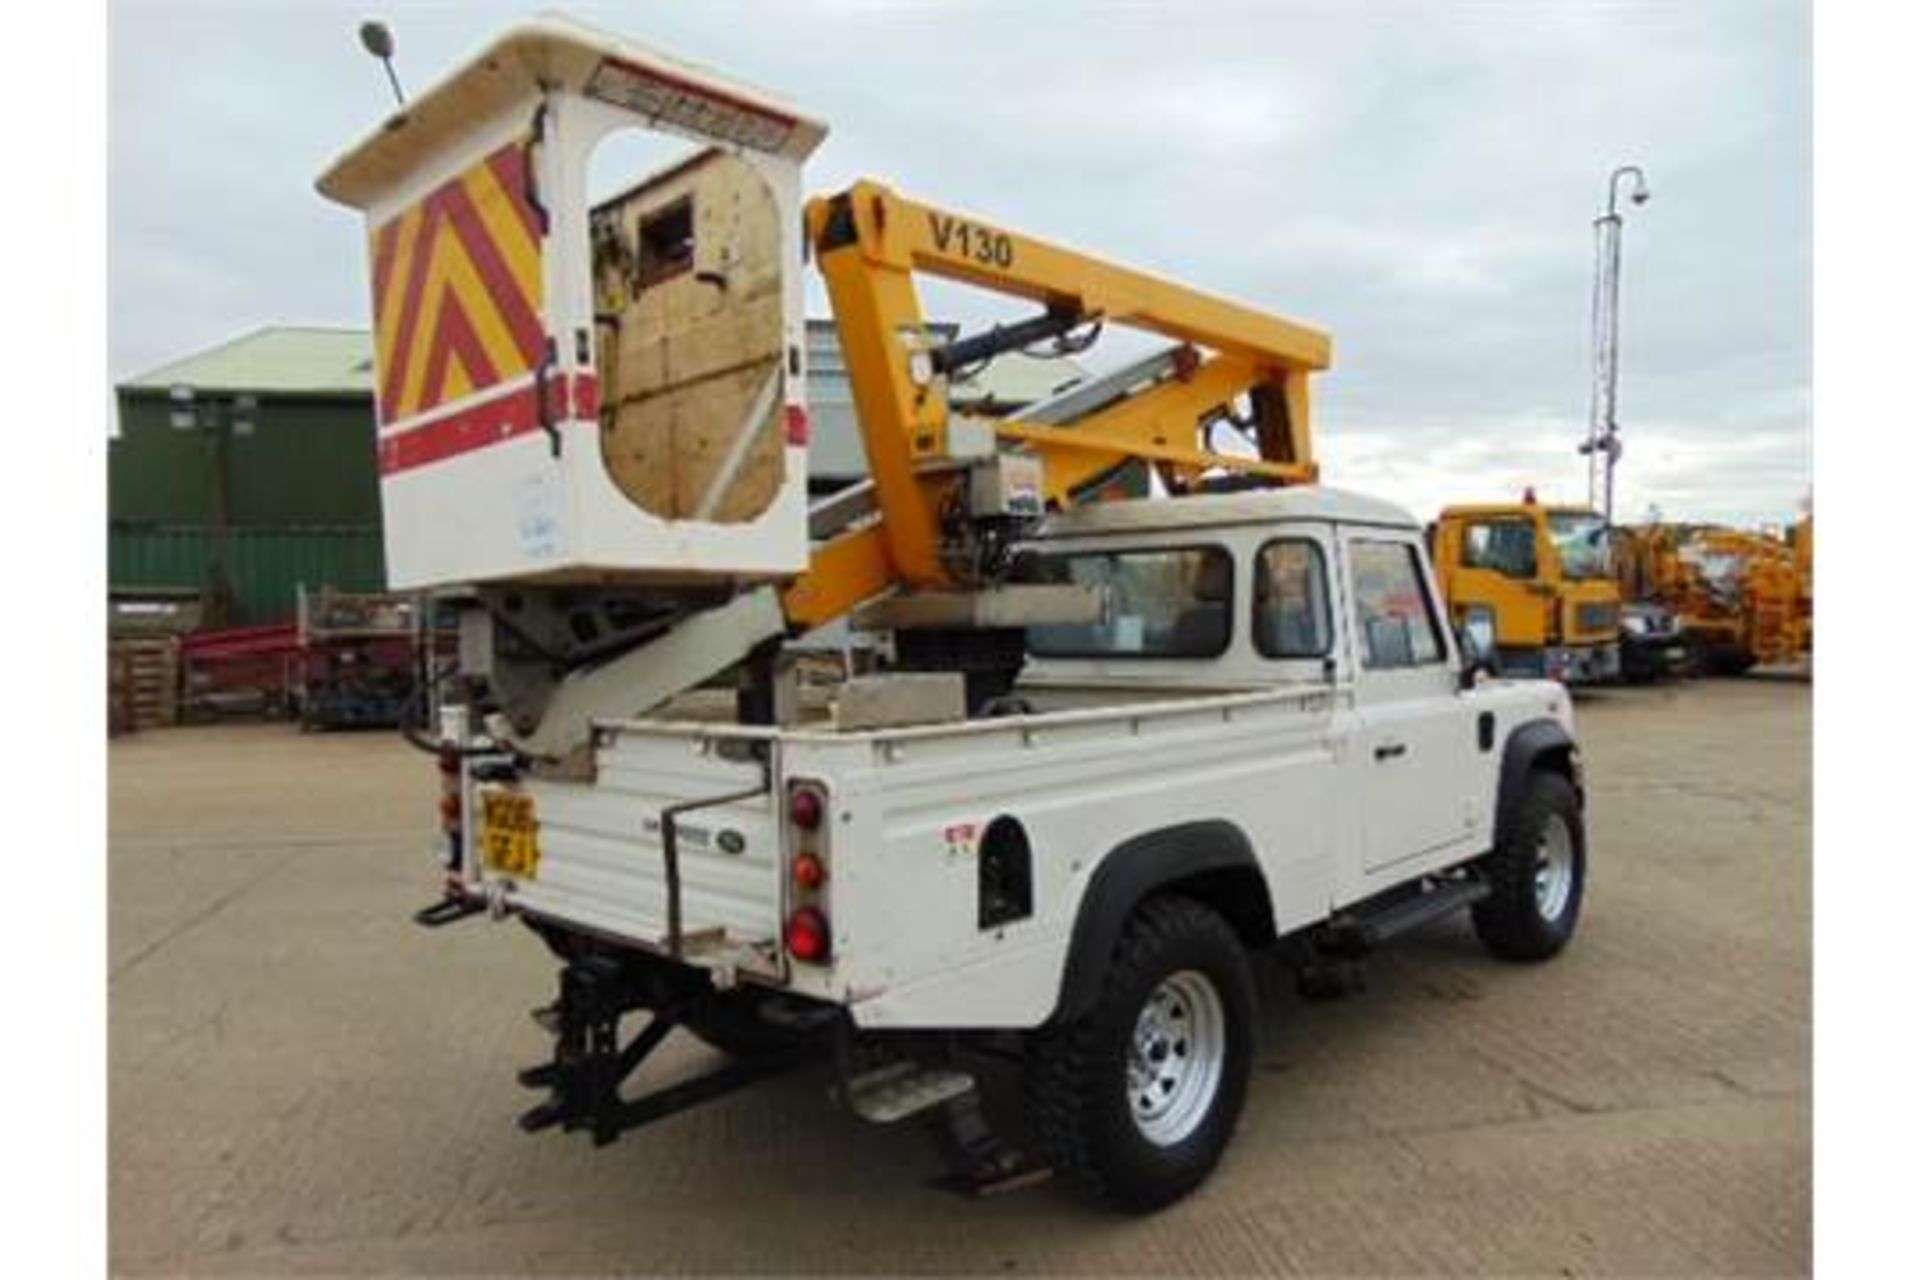 Land Rover Defender 110 High Capacity Cherry Picker - Image 9 of 34